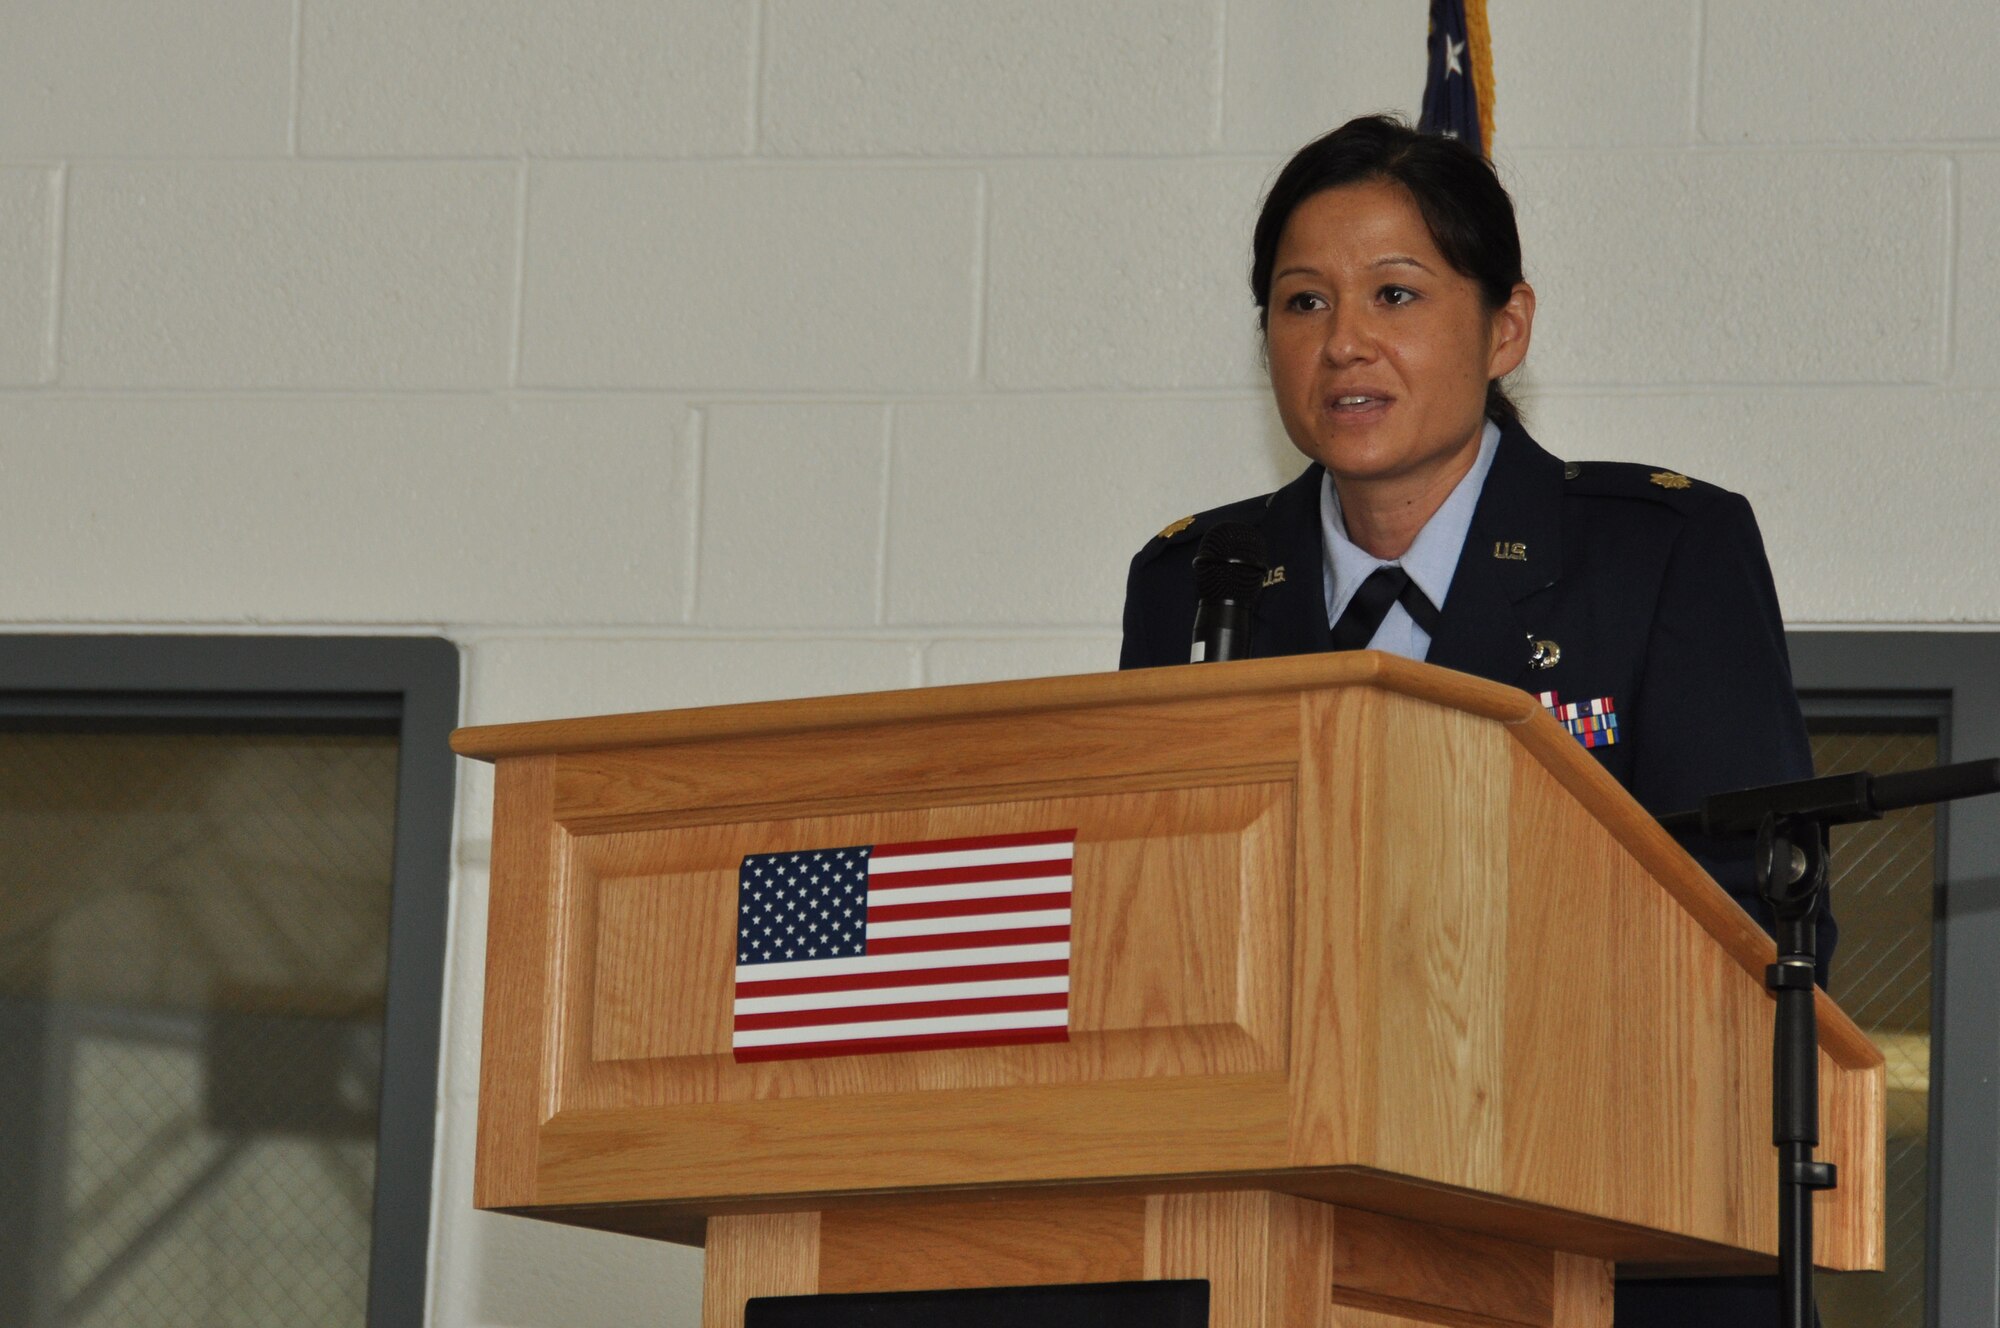 U.S. Air Force Maj. Cynthia Vernier, 459th Aircraft Maintenance Squadron commander, speaks to the audience after she assumed command in a change of command ceremony at Joint Base Andrews, Md., July 13, 2013. Vernier was previously the 44th Maintenance Squadron commander, Holloman Air Force Base, N.M., before arriving at the 459 AMXS as a maintenance officer in April of 2013. (U.S. Air Force photo by Staff Sgt. Brent A. Skeen)